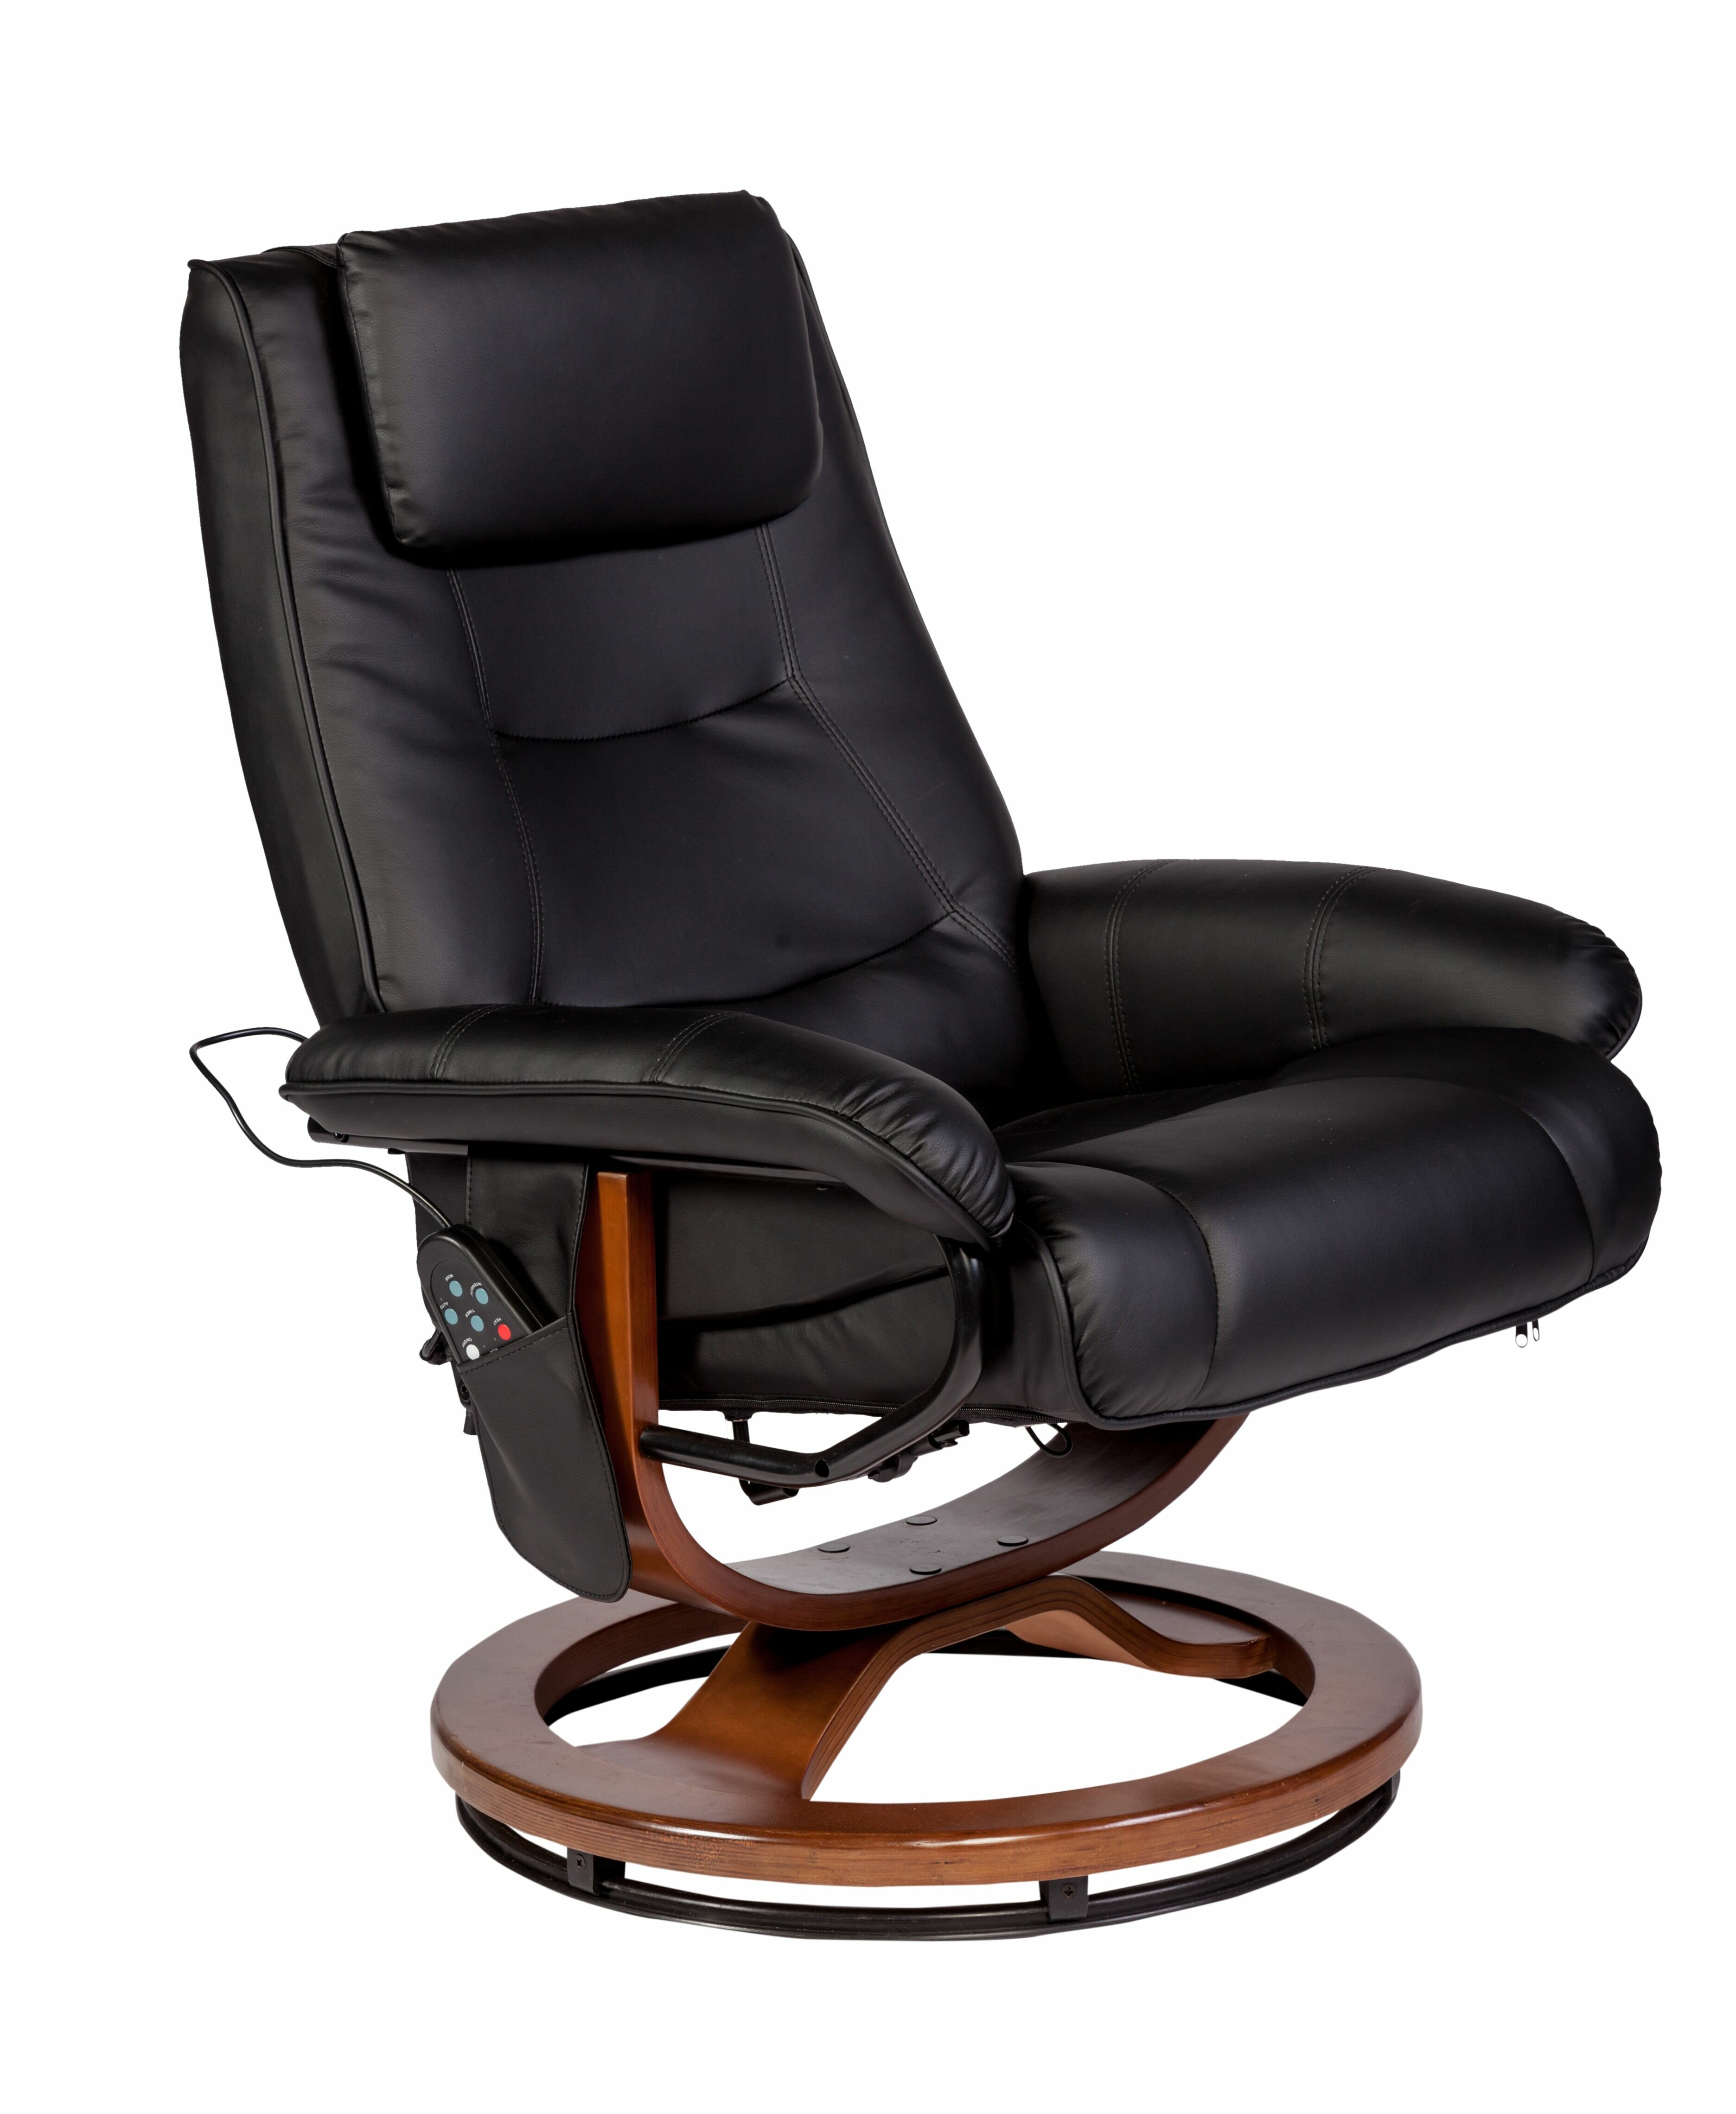 Charlton Home Reclining Heated Massage Chair With Ottoman